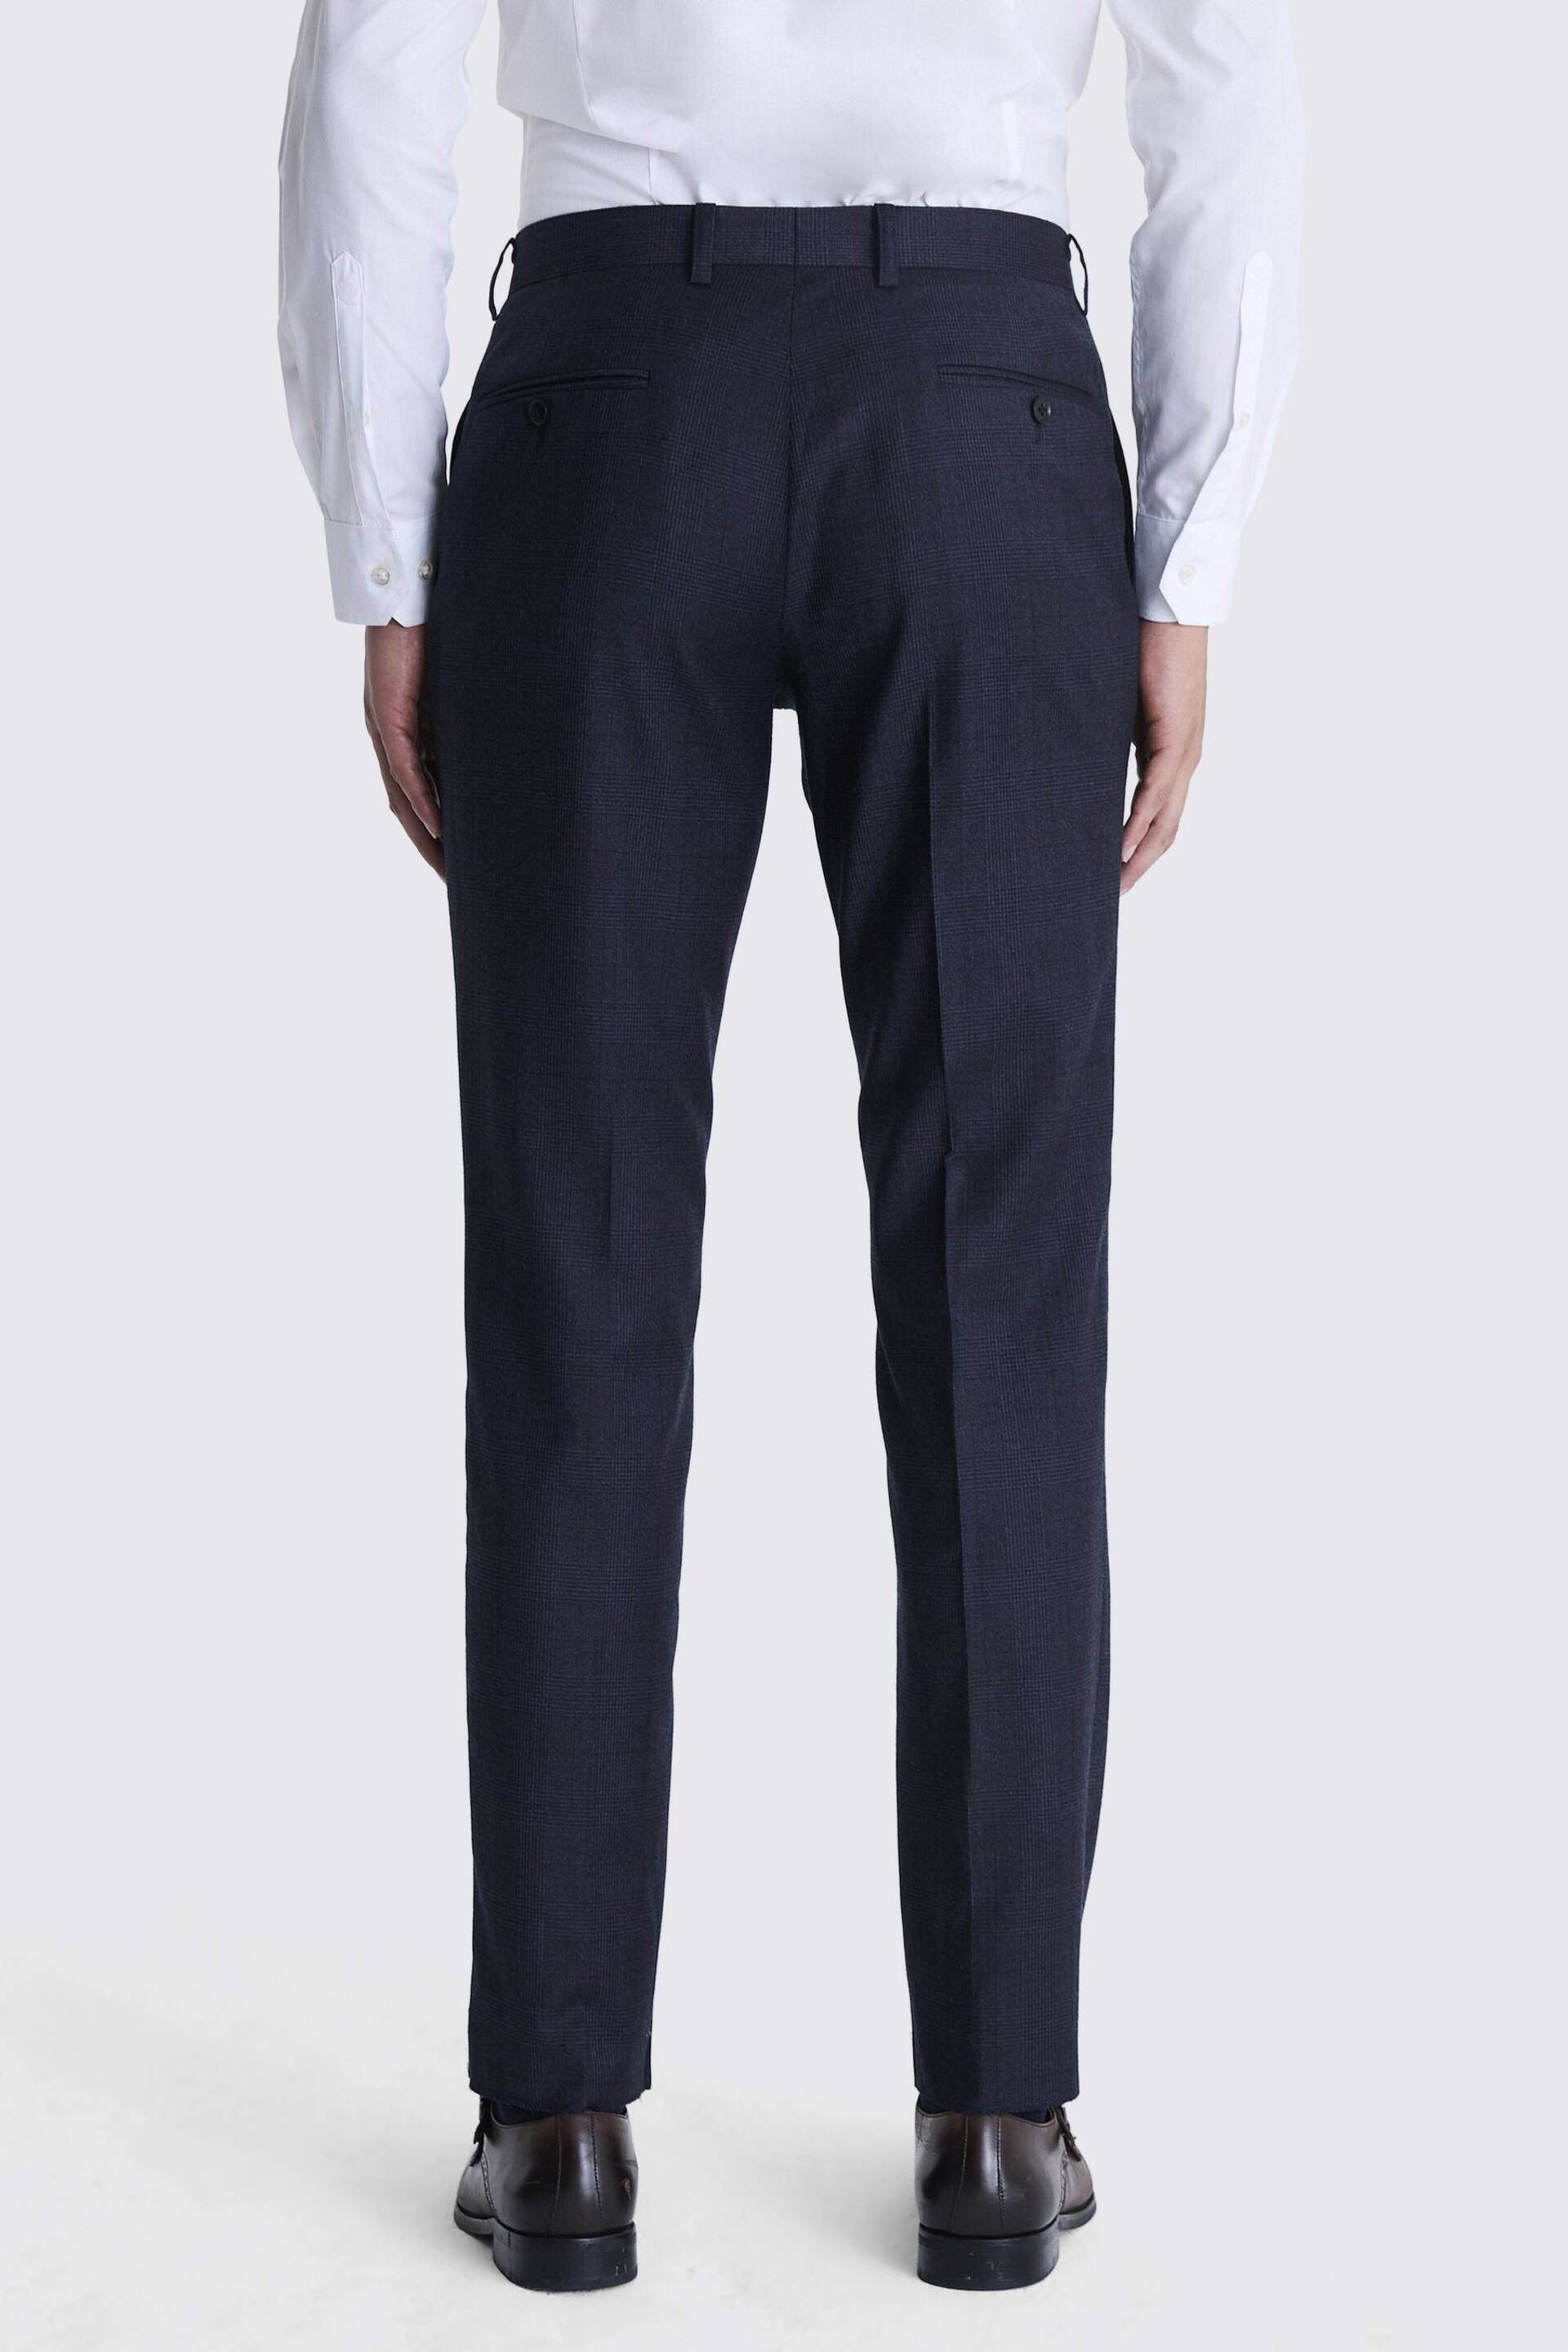 MOSS Navy Blue Tailored Fit Milled Check Suit Trousers - Image 2 of 3